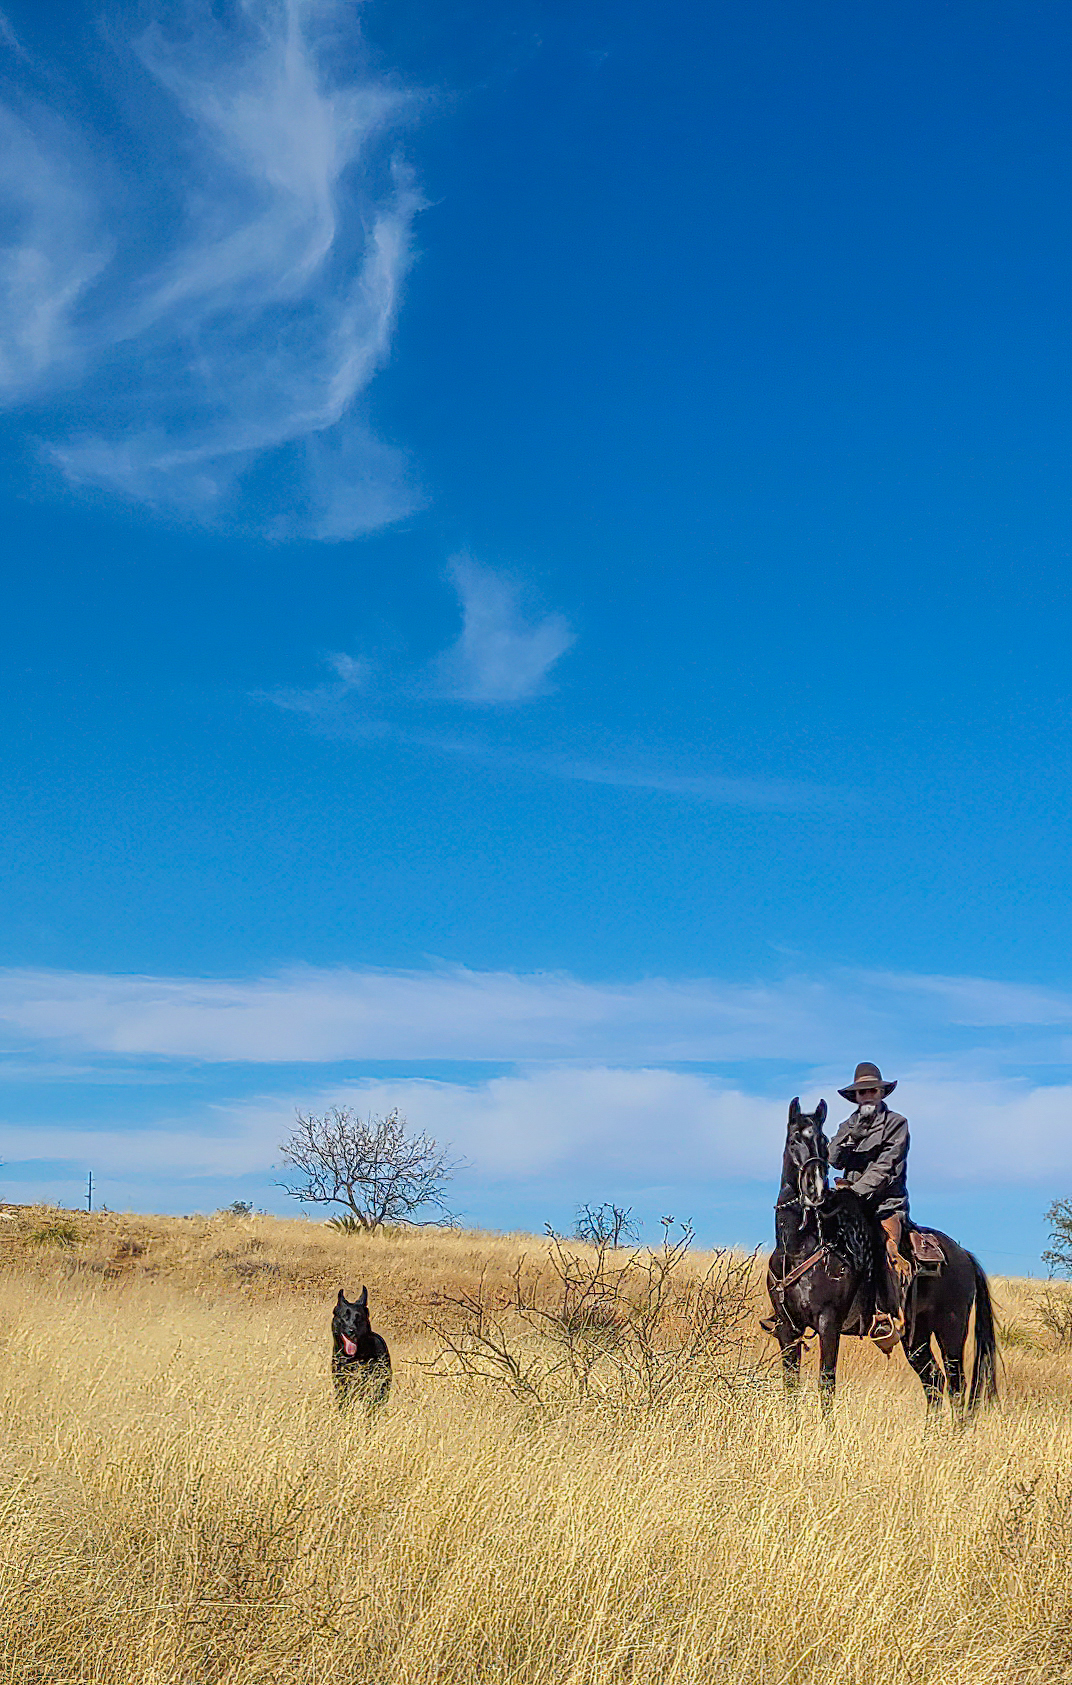 Photo by Beth Lierman  |  While off-roading in the Santa Rita Mountains, we happened upon a cowboy and his dog.  I quickly picked up my phone and took the picture while bouncing around in our side-by-side 4-wheeler.